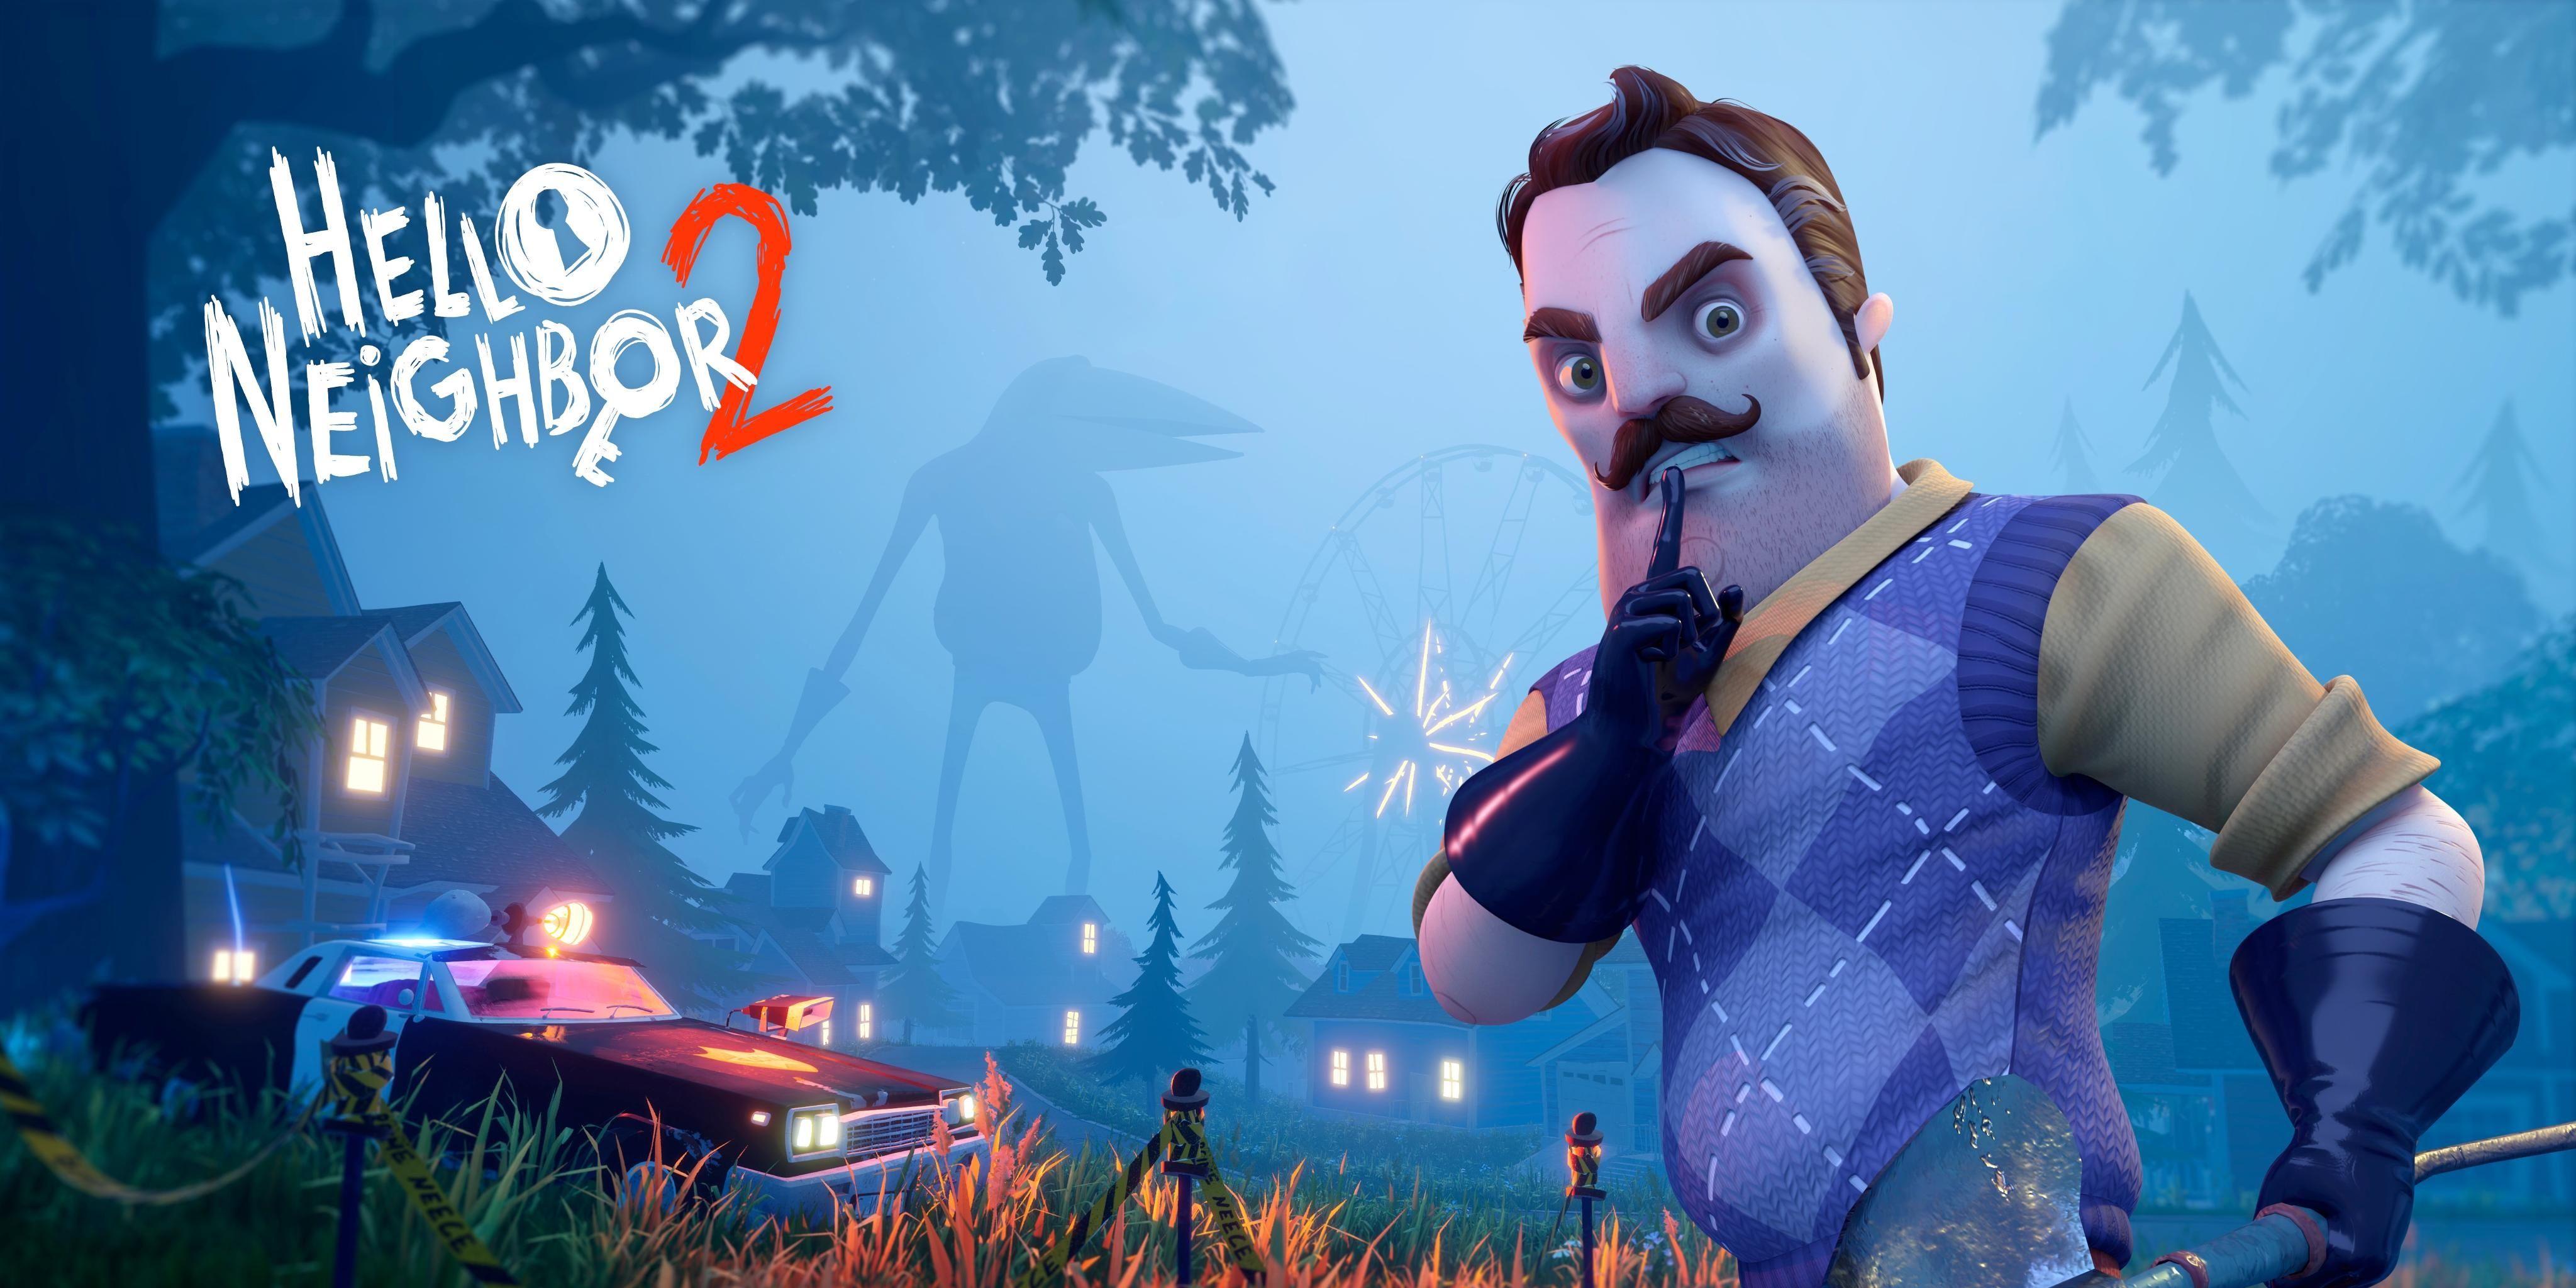 Poster for Hello Neighbor 2 featuring Mr. Peterson the Neighbor making a shush expression